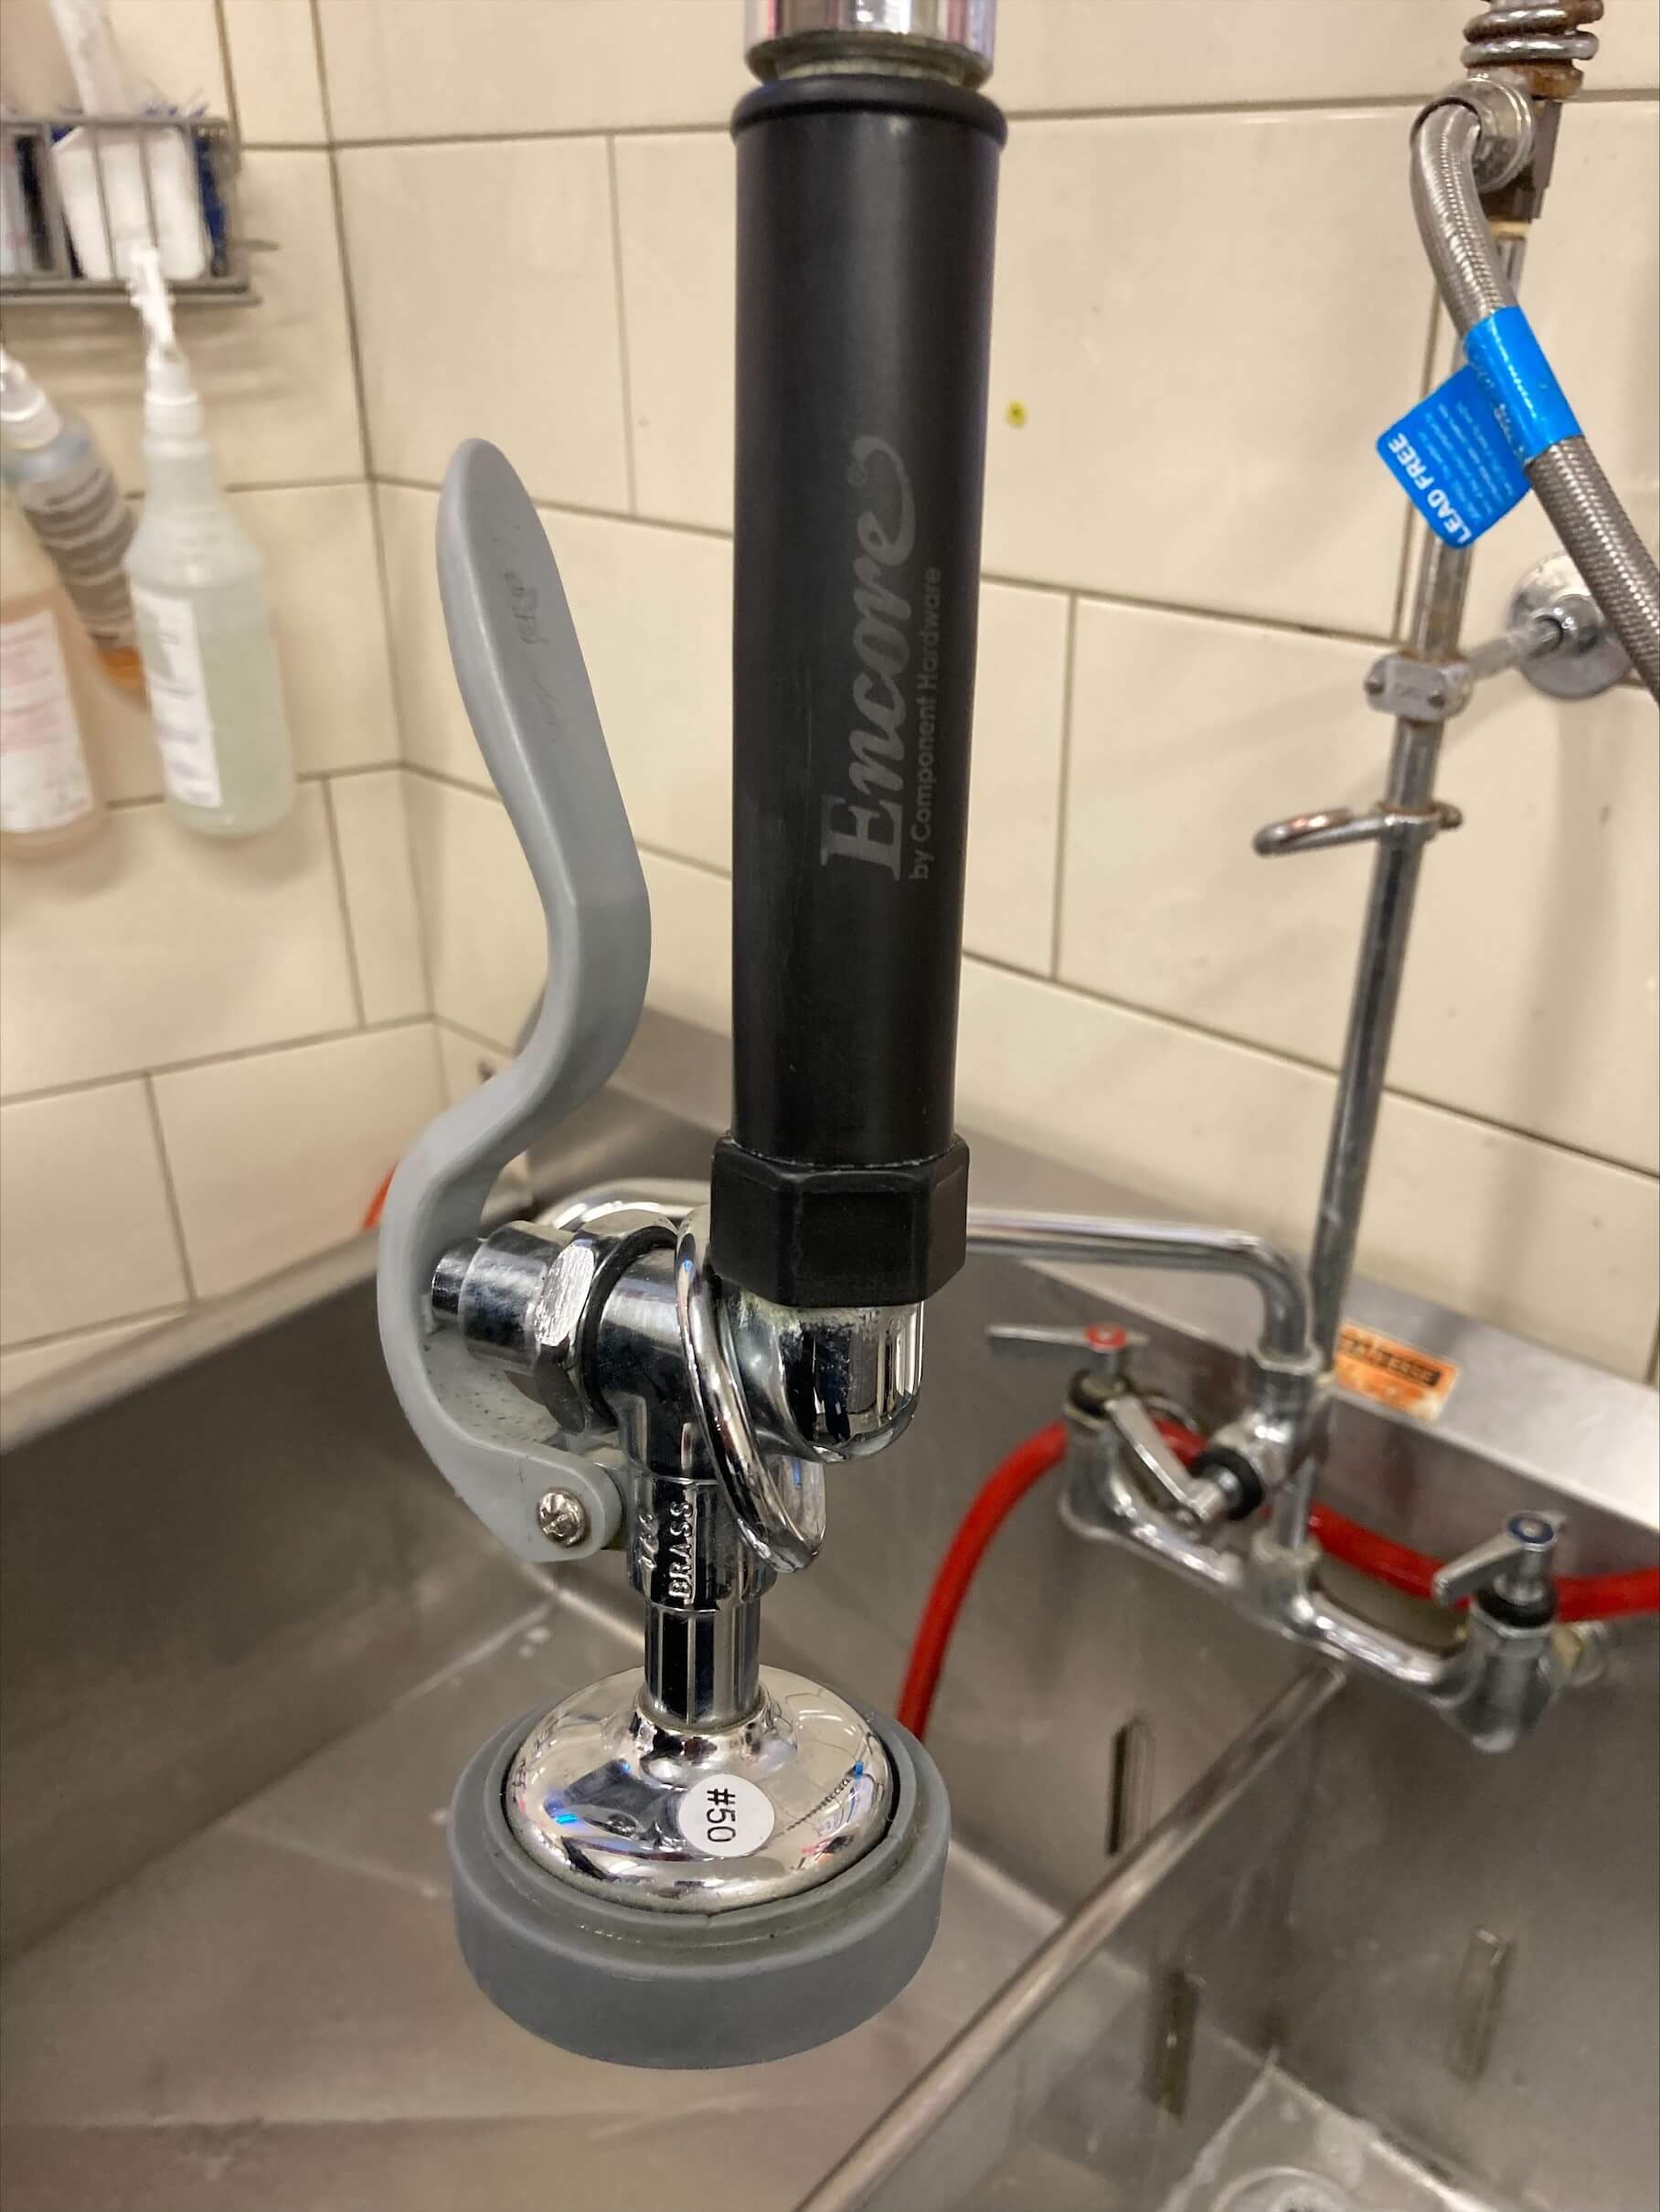 Low-flow spray valve on a faucet